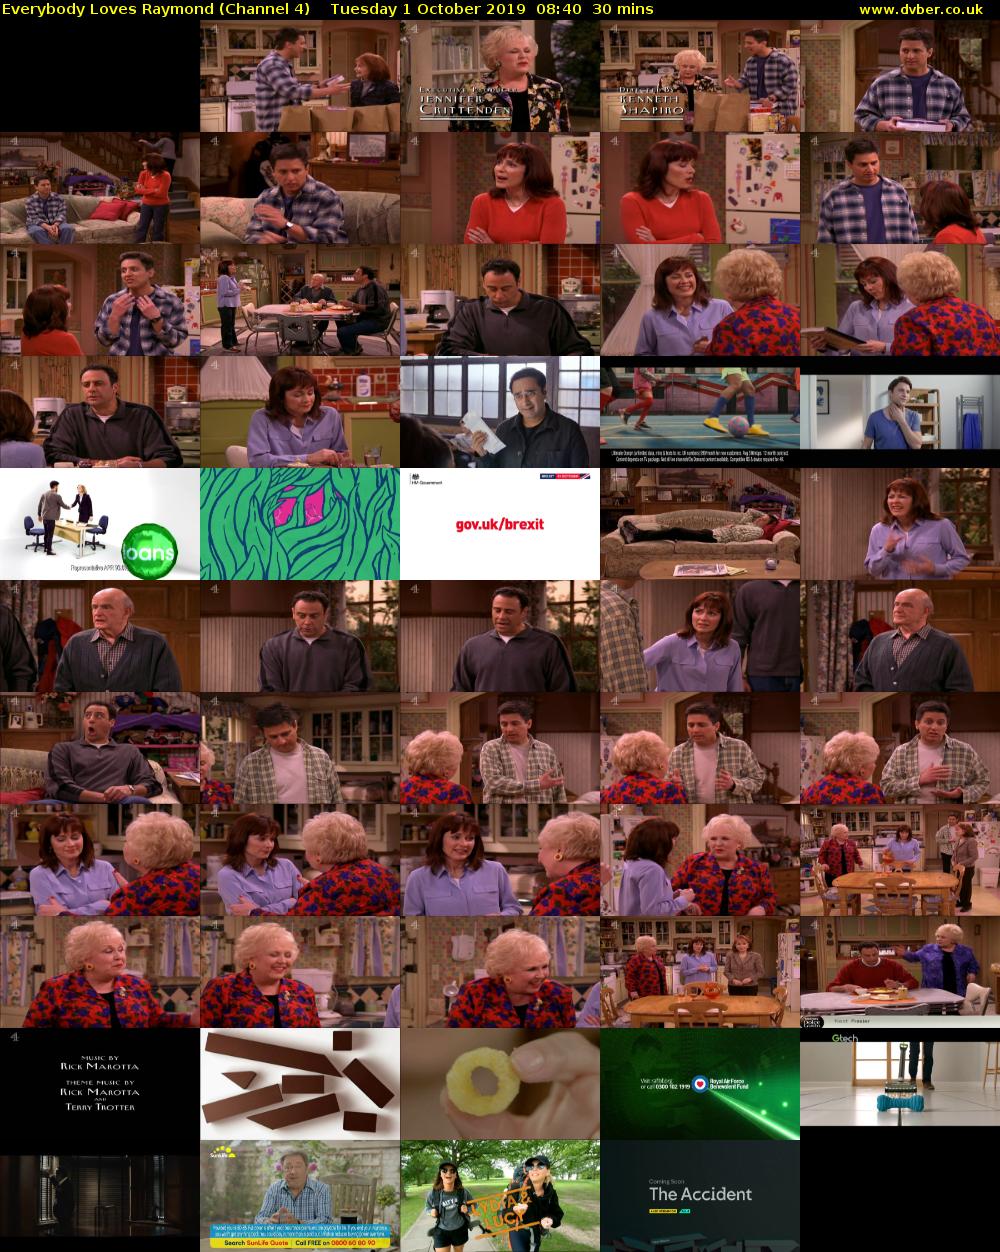 Everybody Loves Raymond (Channel 4) Tuesday 1 October 2019 08:40 - 09:10